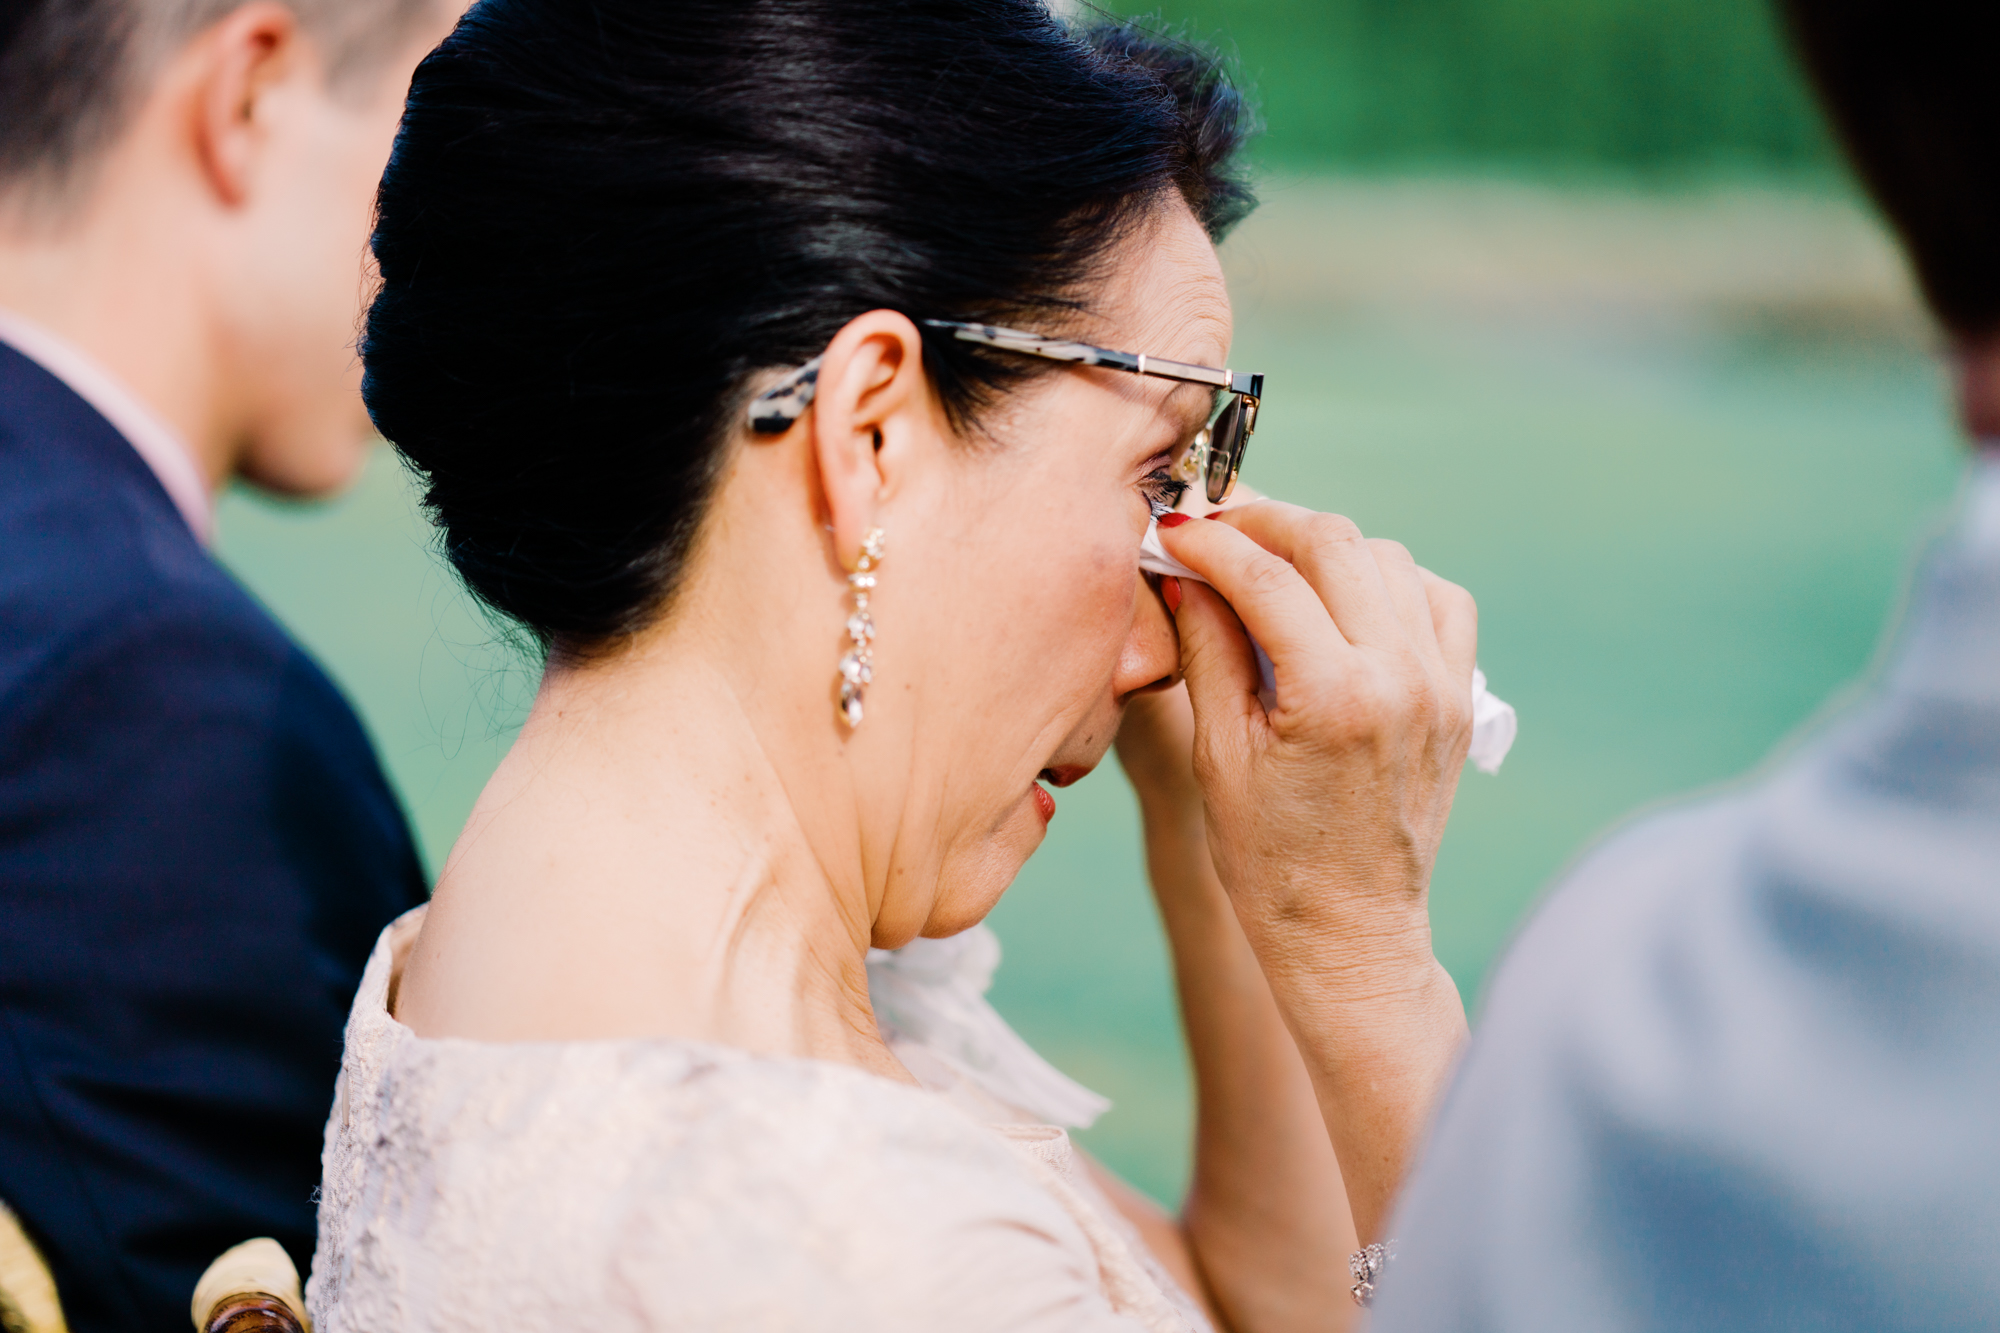 Bride's mom gets emotional during the wedding ceremony.